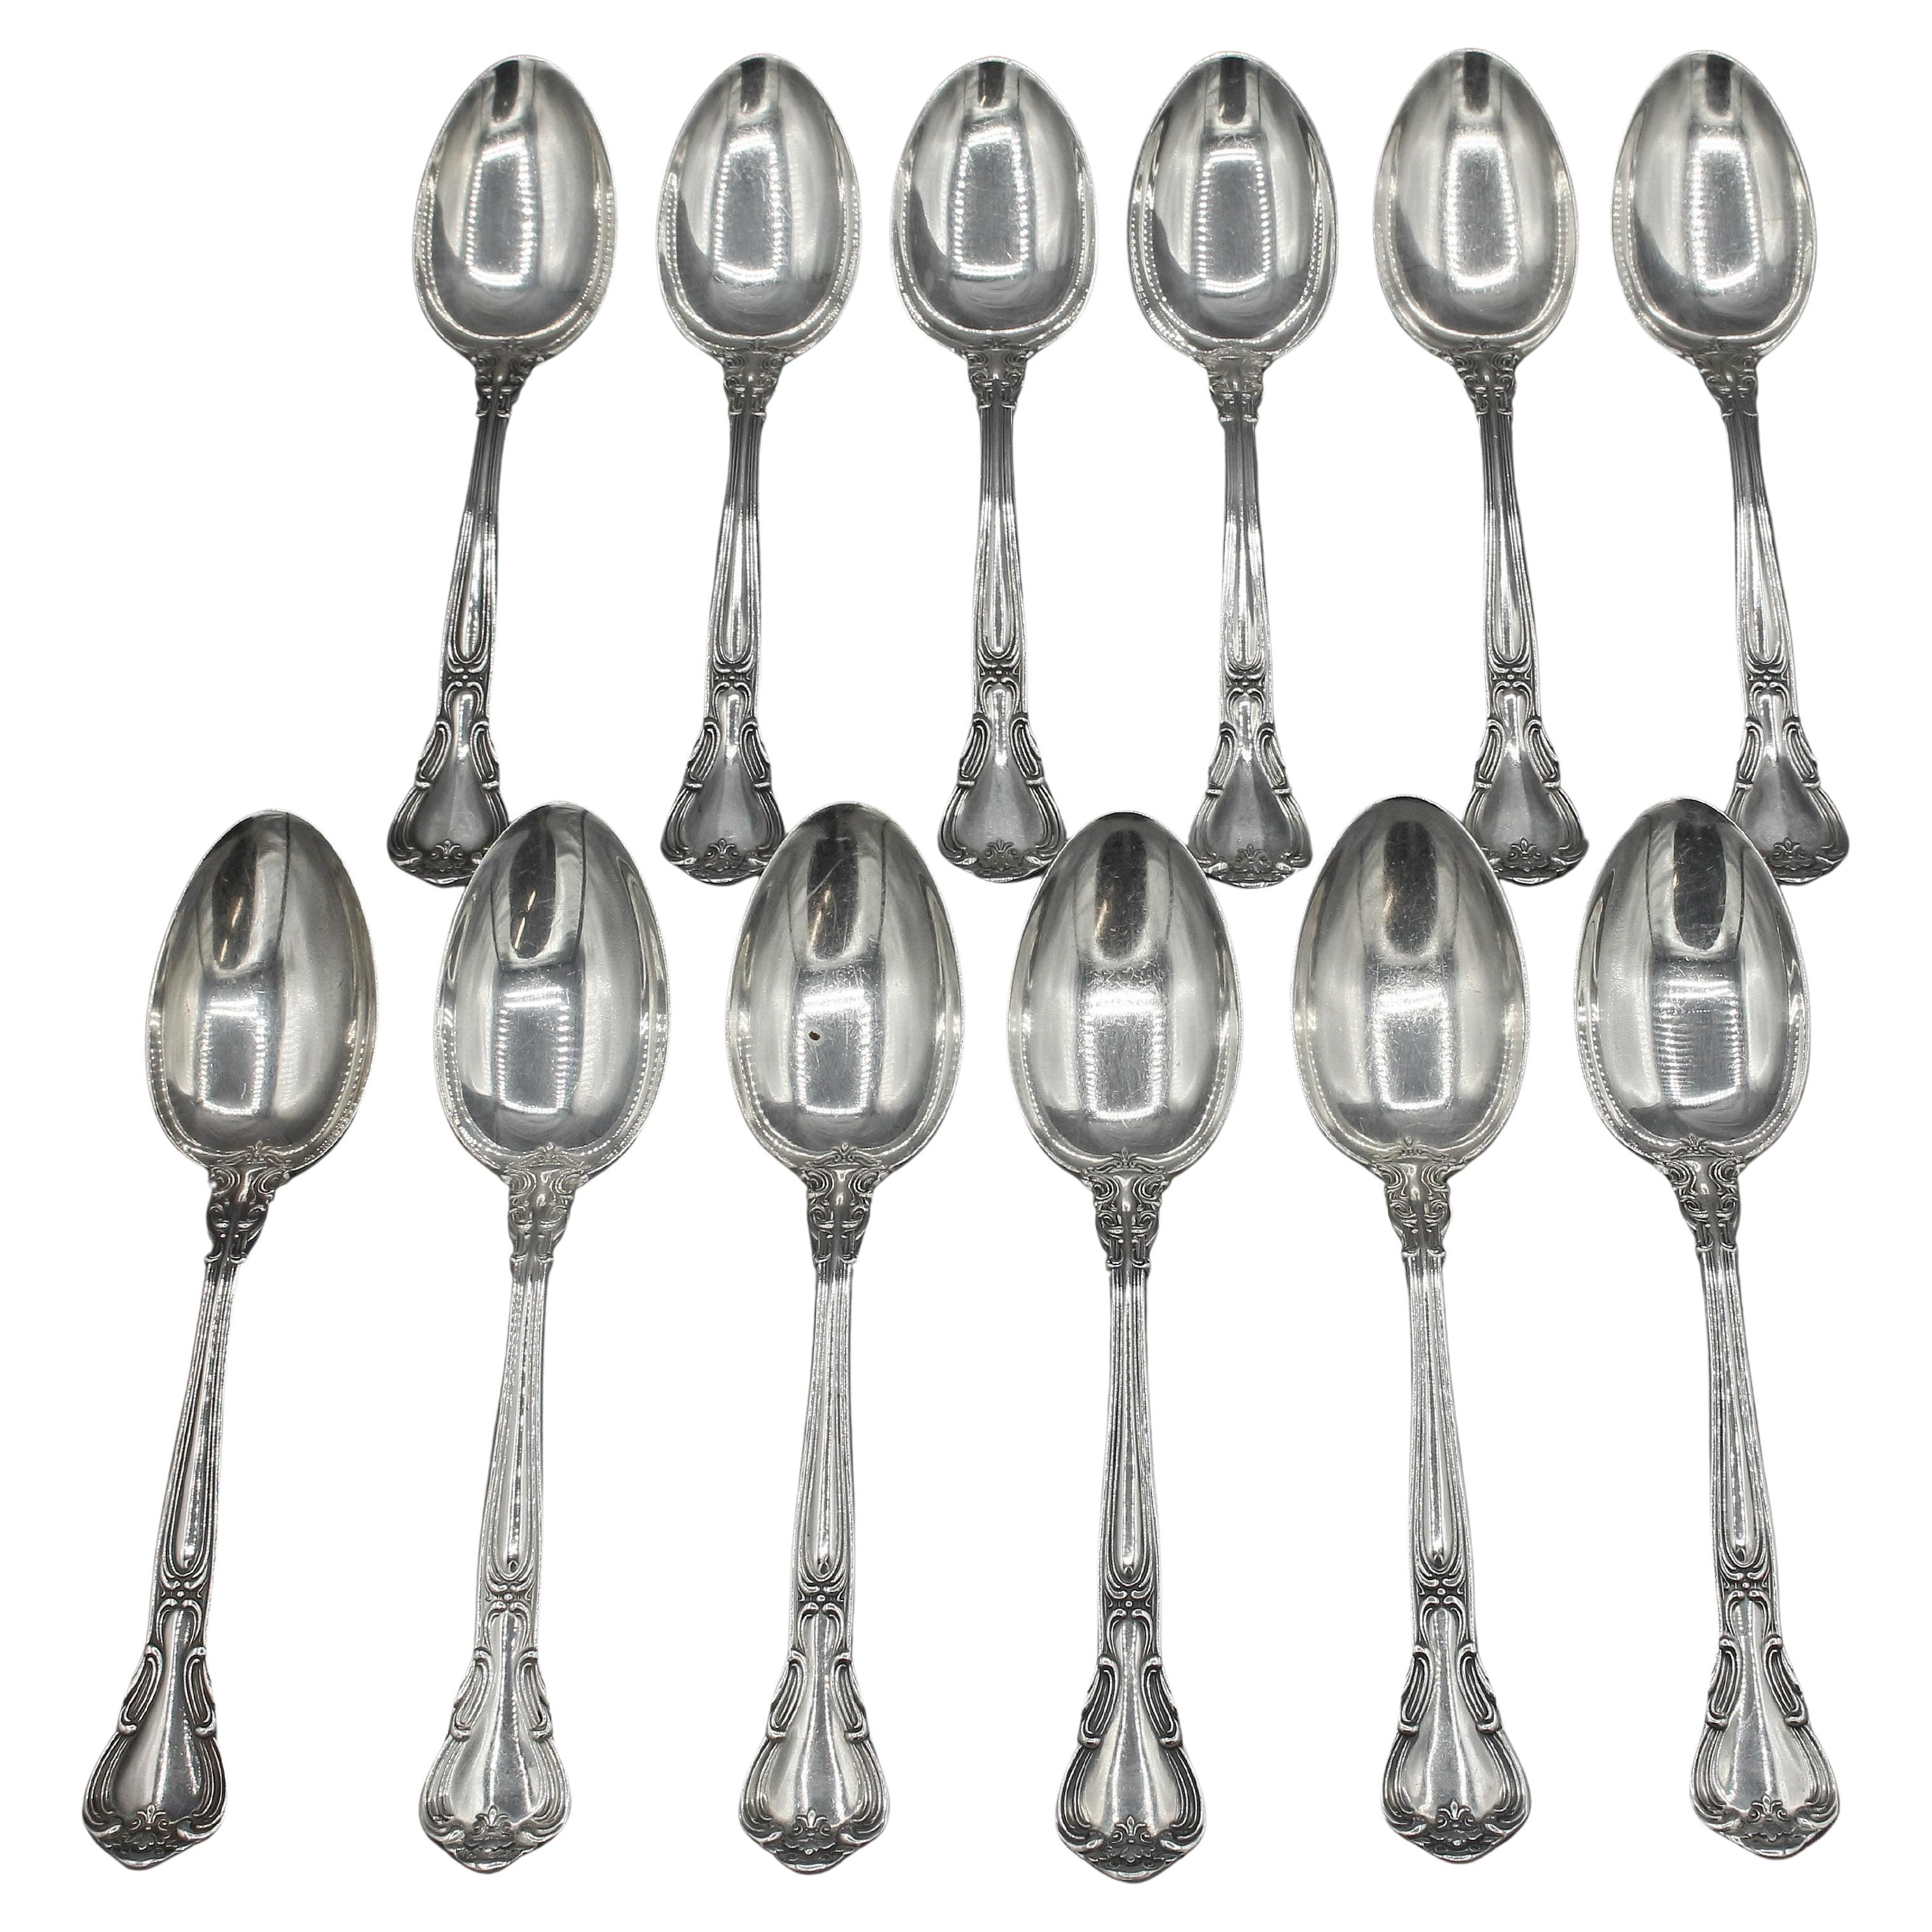 Circa 1950s-70s Set of 12 Chantilly Sterling Teaspoons by Gorham For Sale